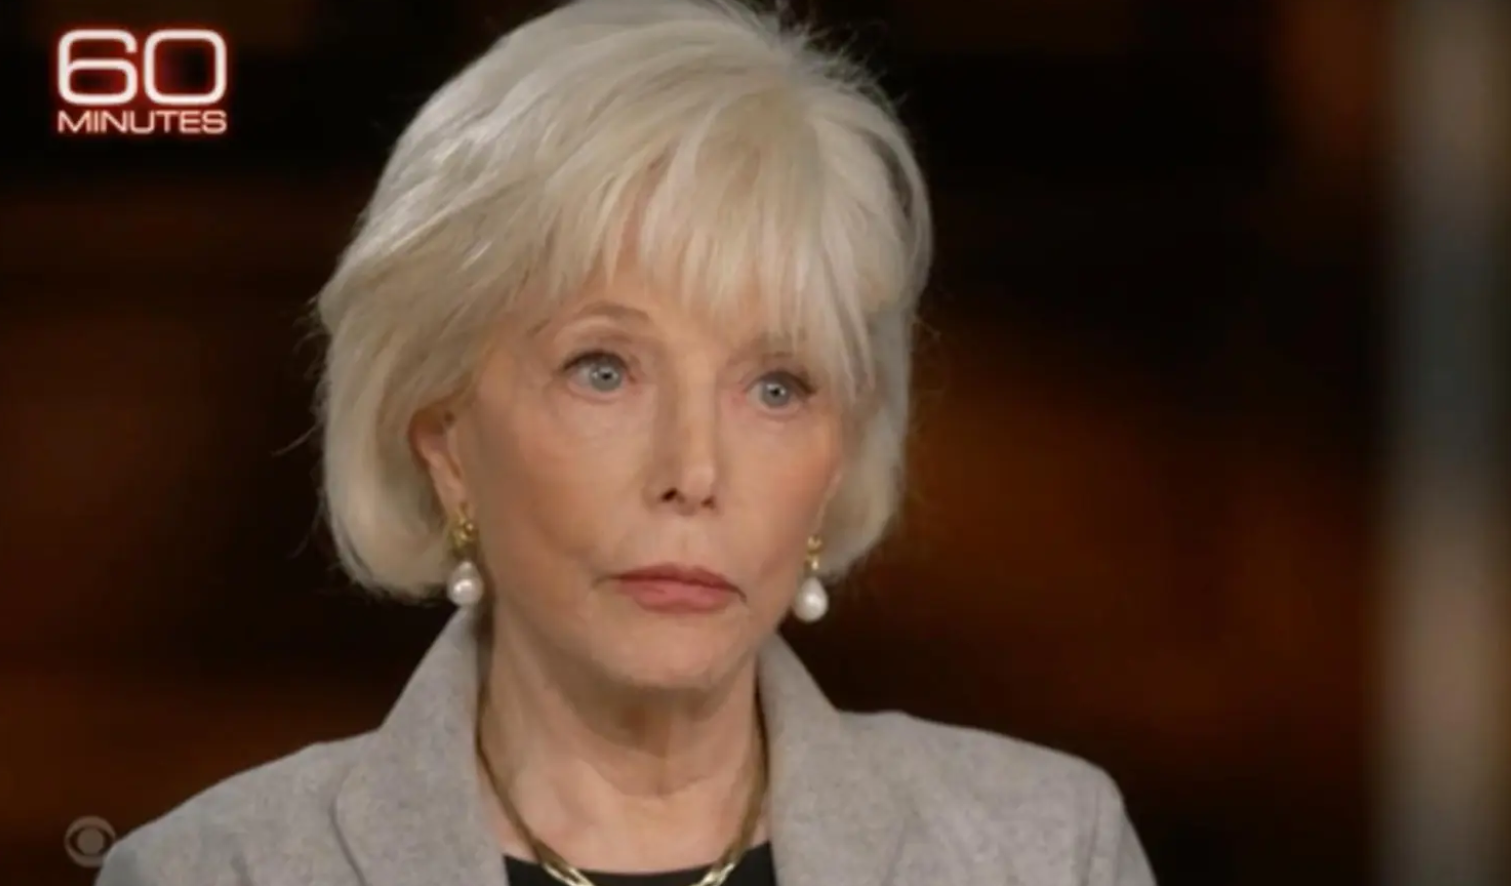 Leslie Stahl blasted by liberals for Marjorie Taylor Greene’s 60 Minutes interview